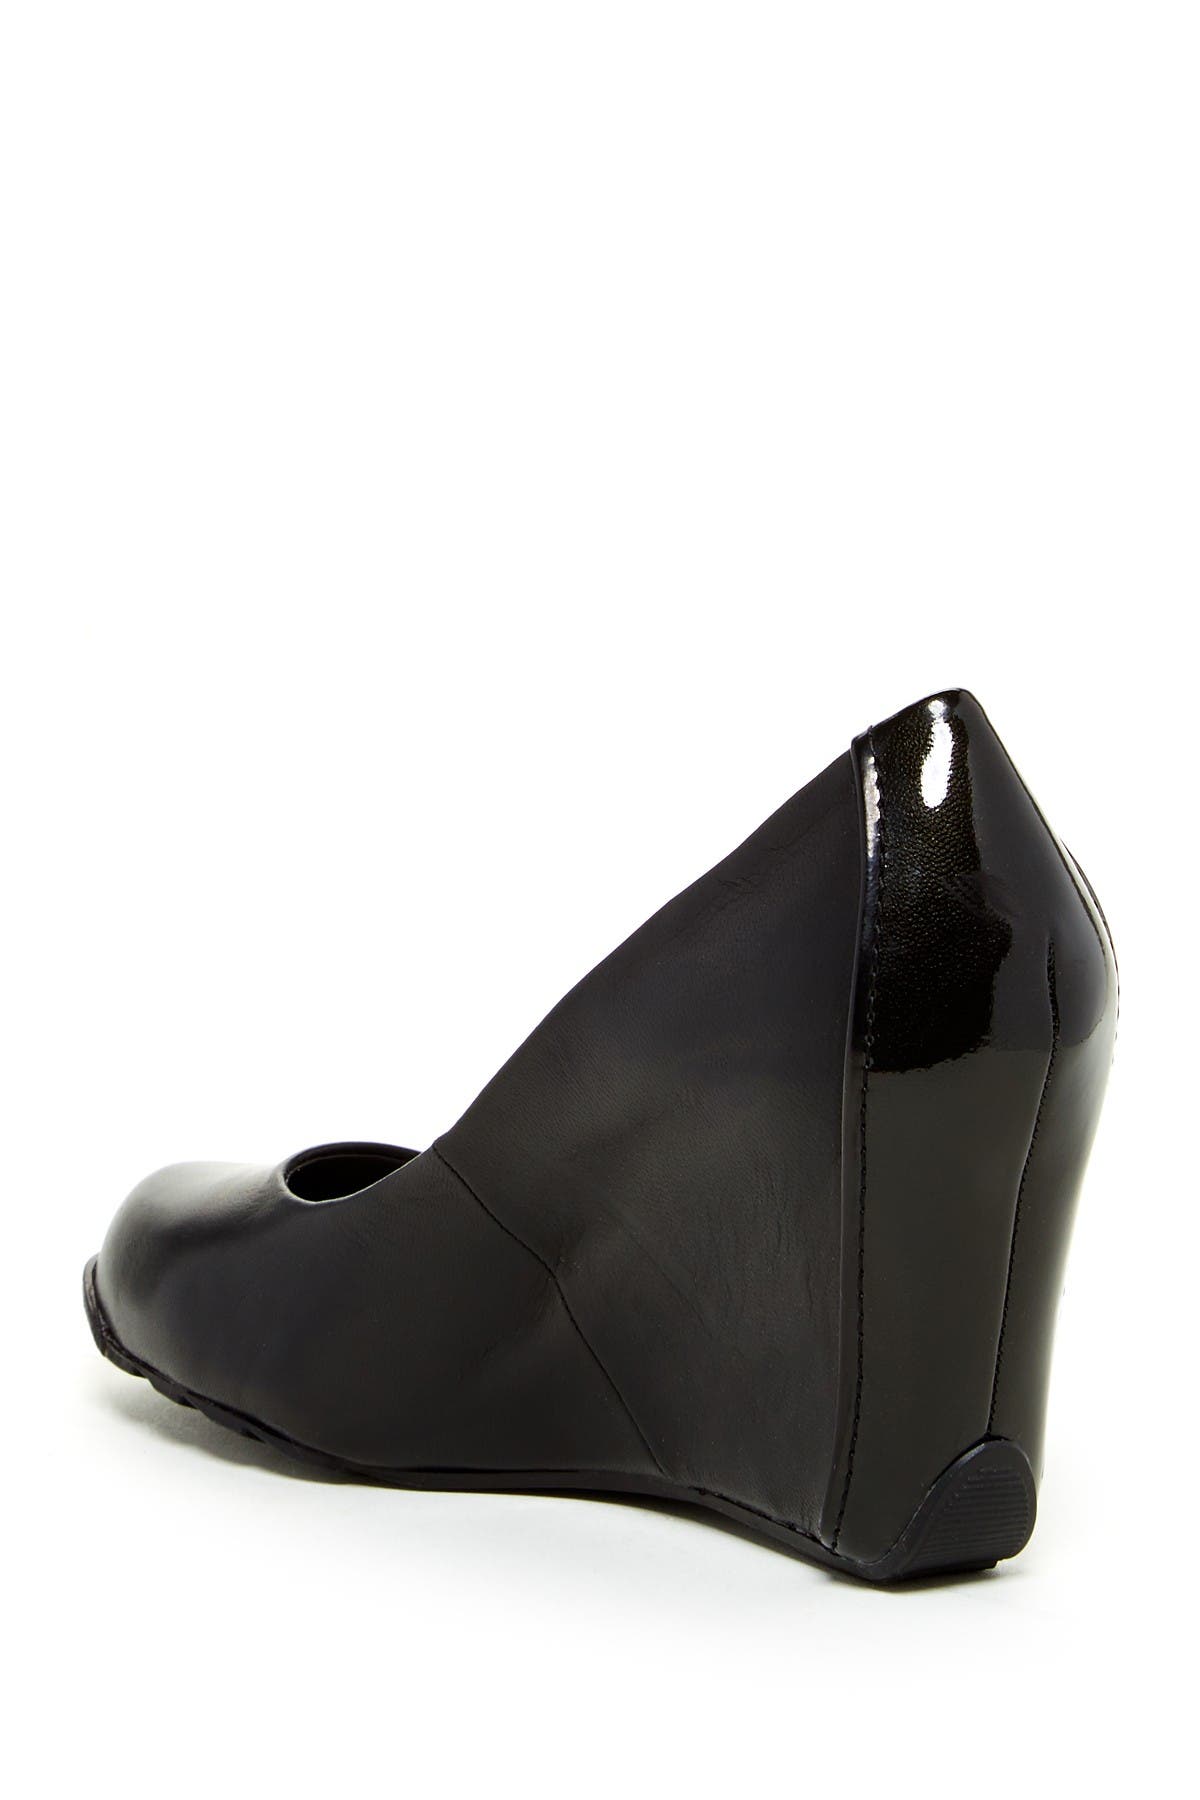 kenneth cole reaction did u tell wedge pumps